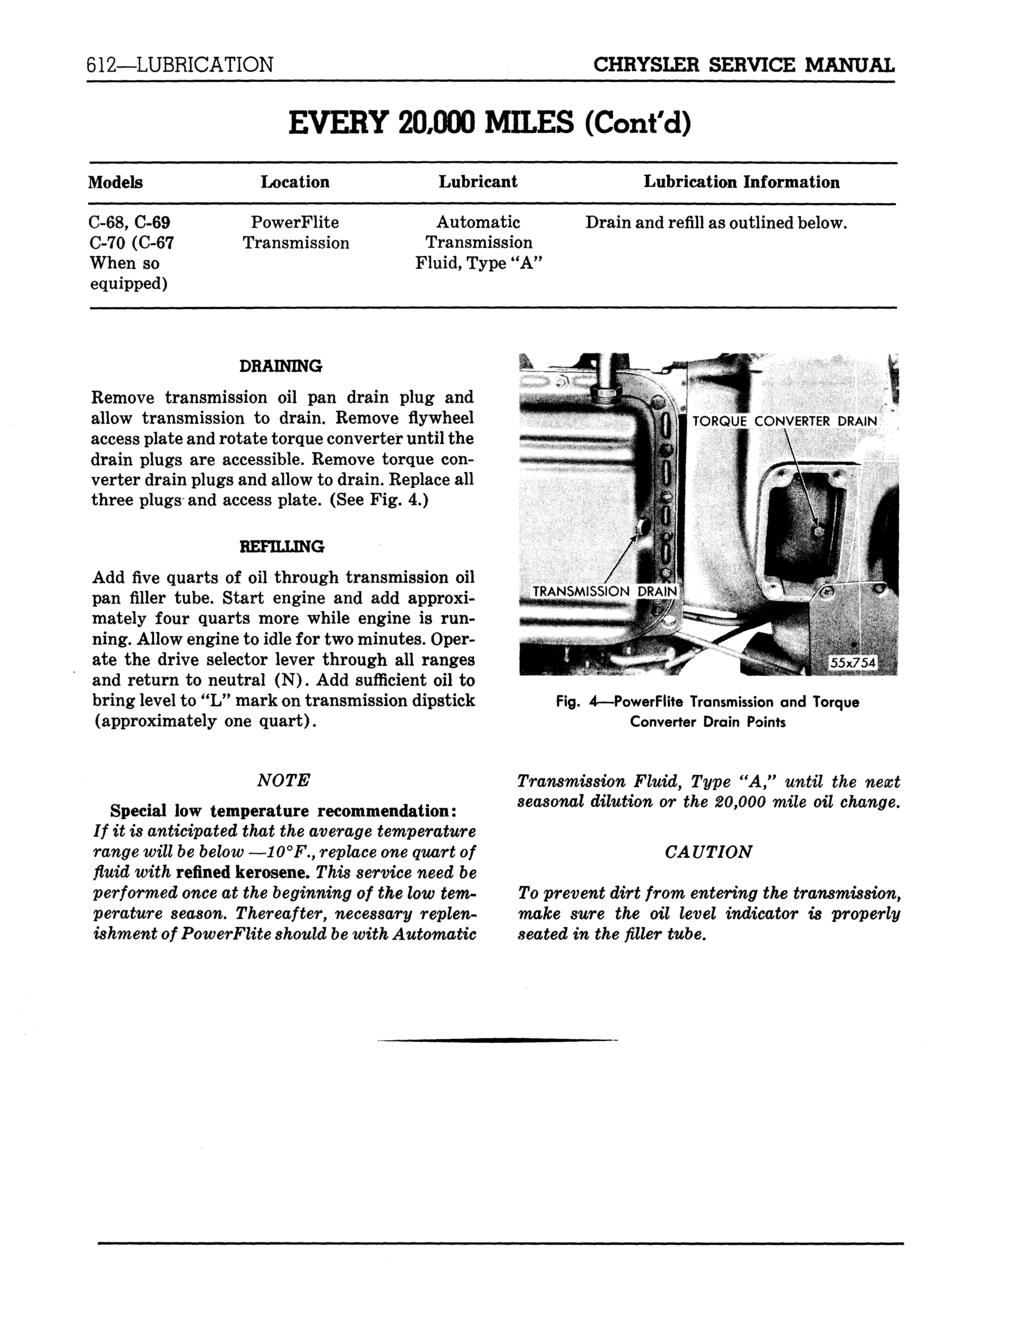 612 LUBRICATION CHRYSLER SERVICE MANUAL EVERY 20,000 MILES (Cont'd) Models Location Lubricant Lubrication Information C-68, C-69 C-70 (C-67 When so equipped) PowerFlite Automatic Fluid, Type "A"